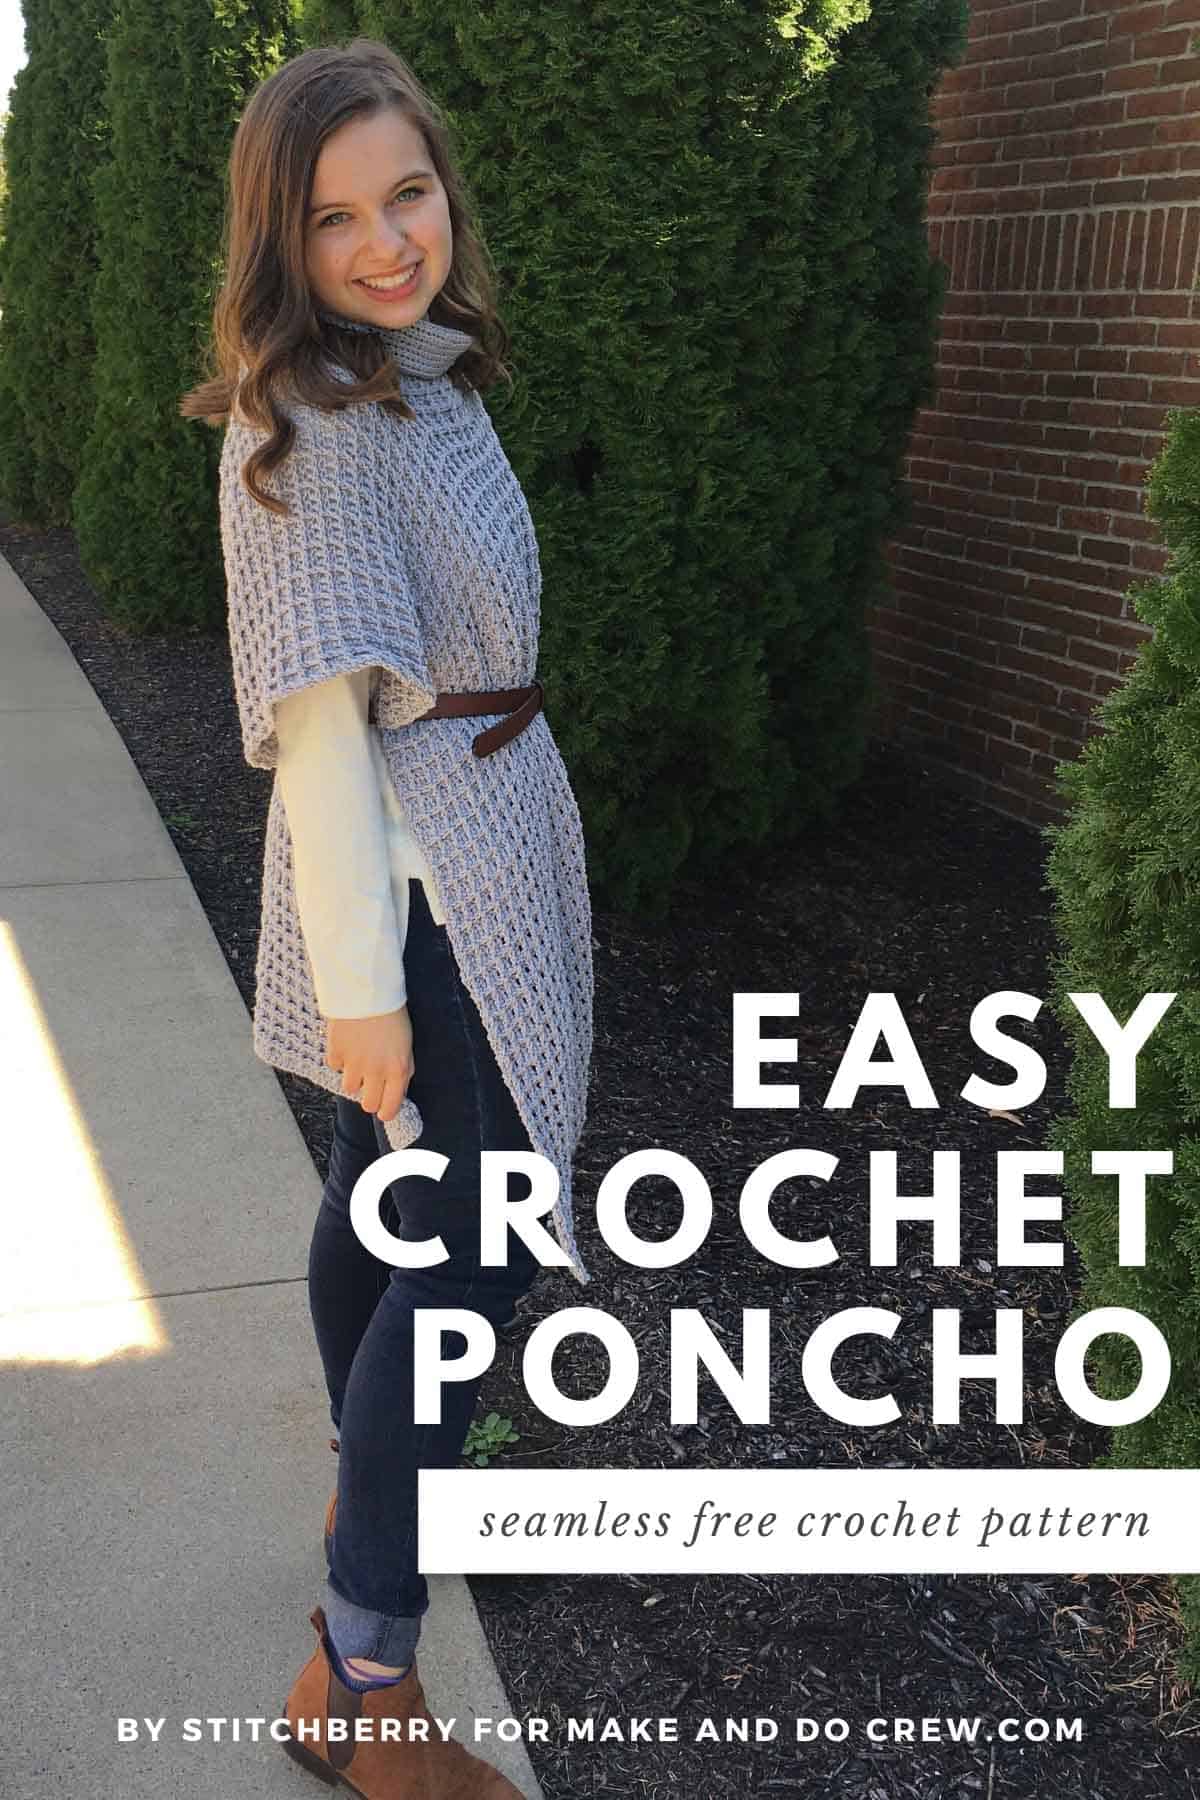 Woman standing on sidewalk on a sunny day in front of a brick wall and tree. She is wearing jeans, a long sleeve white shit, and a long gray crochet poncho with a brown belt cinched around her waist.